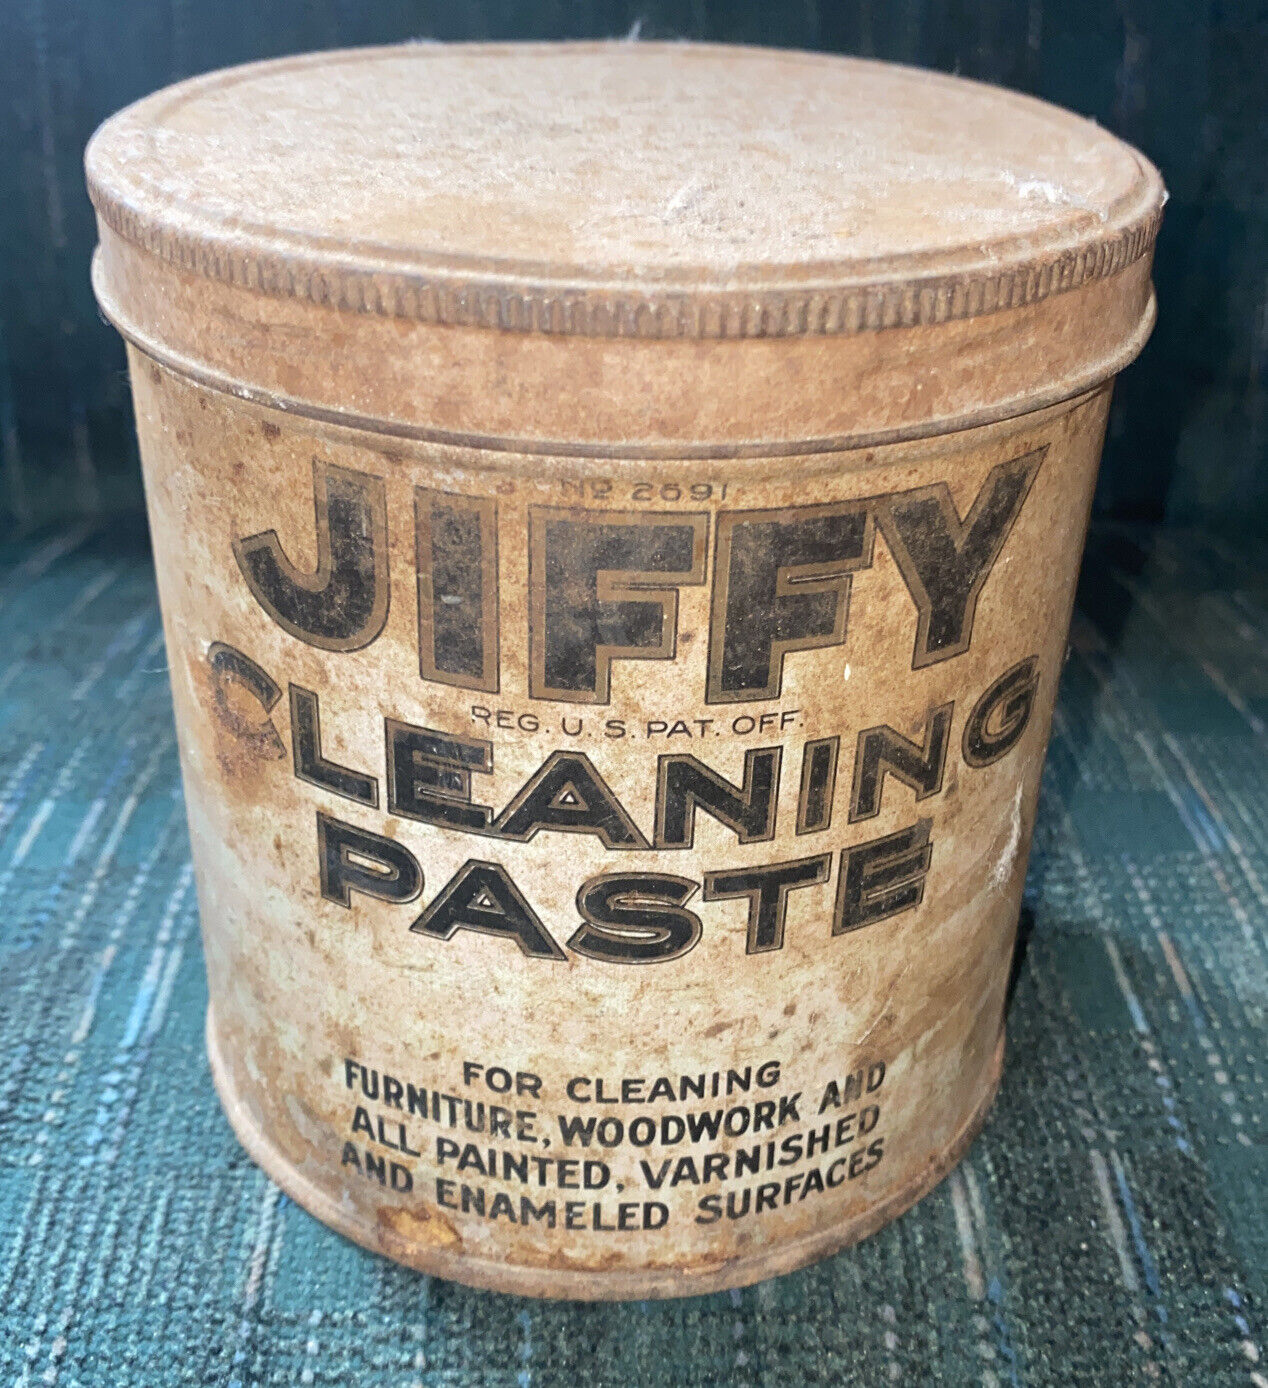 Vintage Jiffy Cleaning Paste Advertising Tin Can Zanol Products Cincinnati Ohio